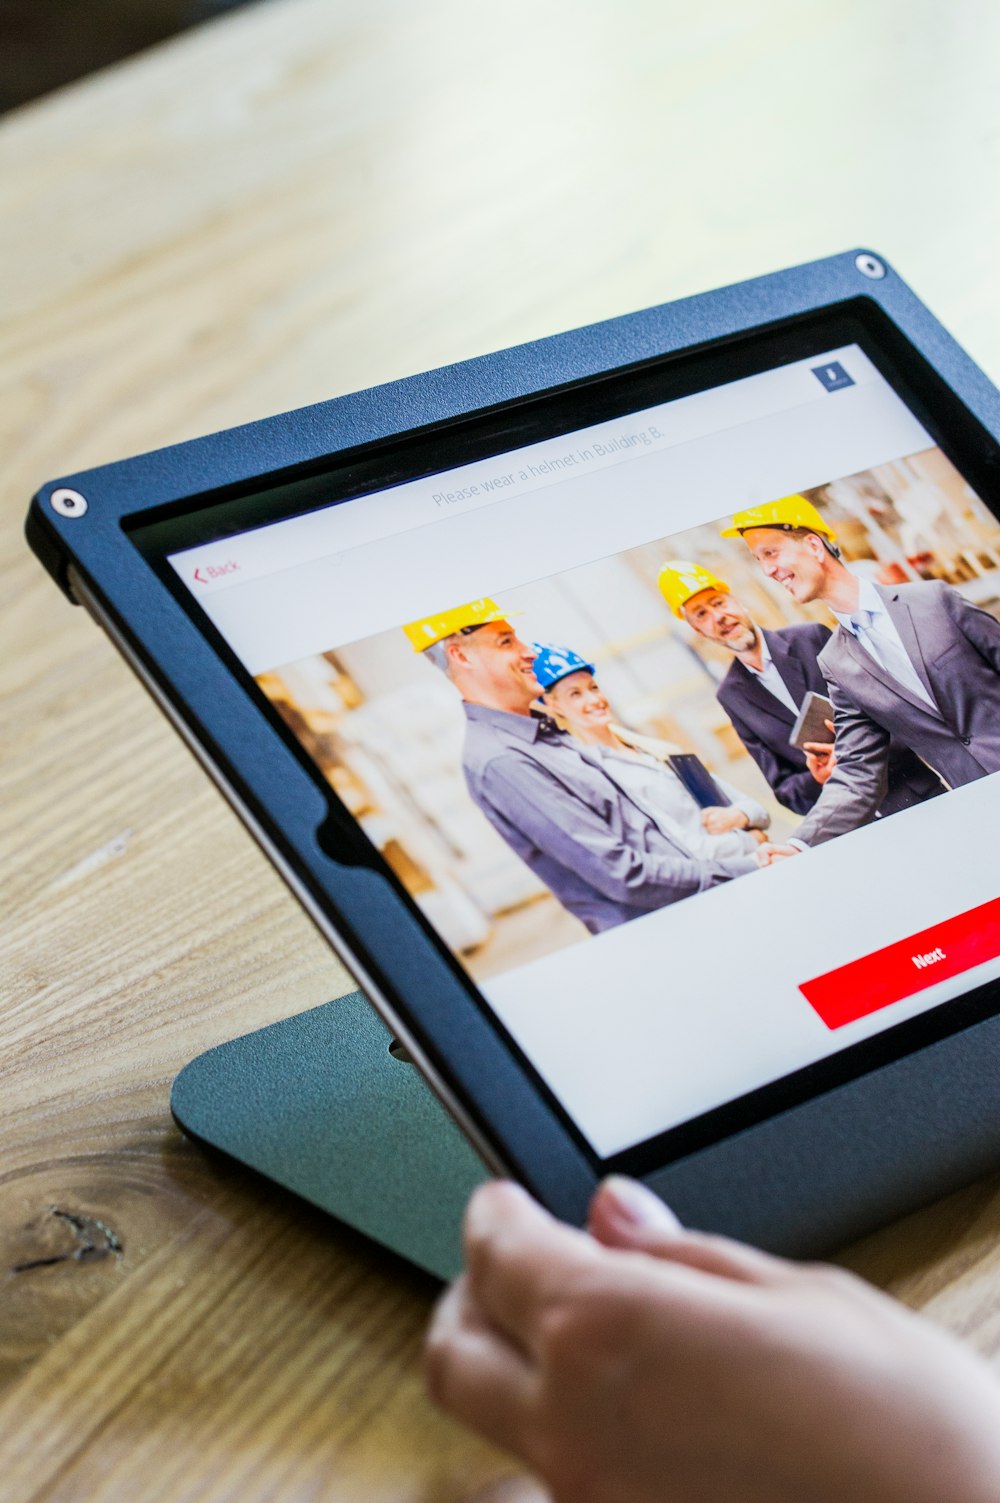 iPad with four business persons shaking hands display